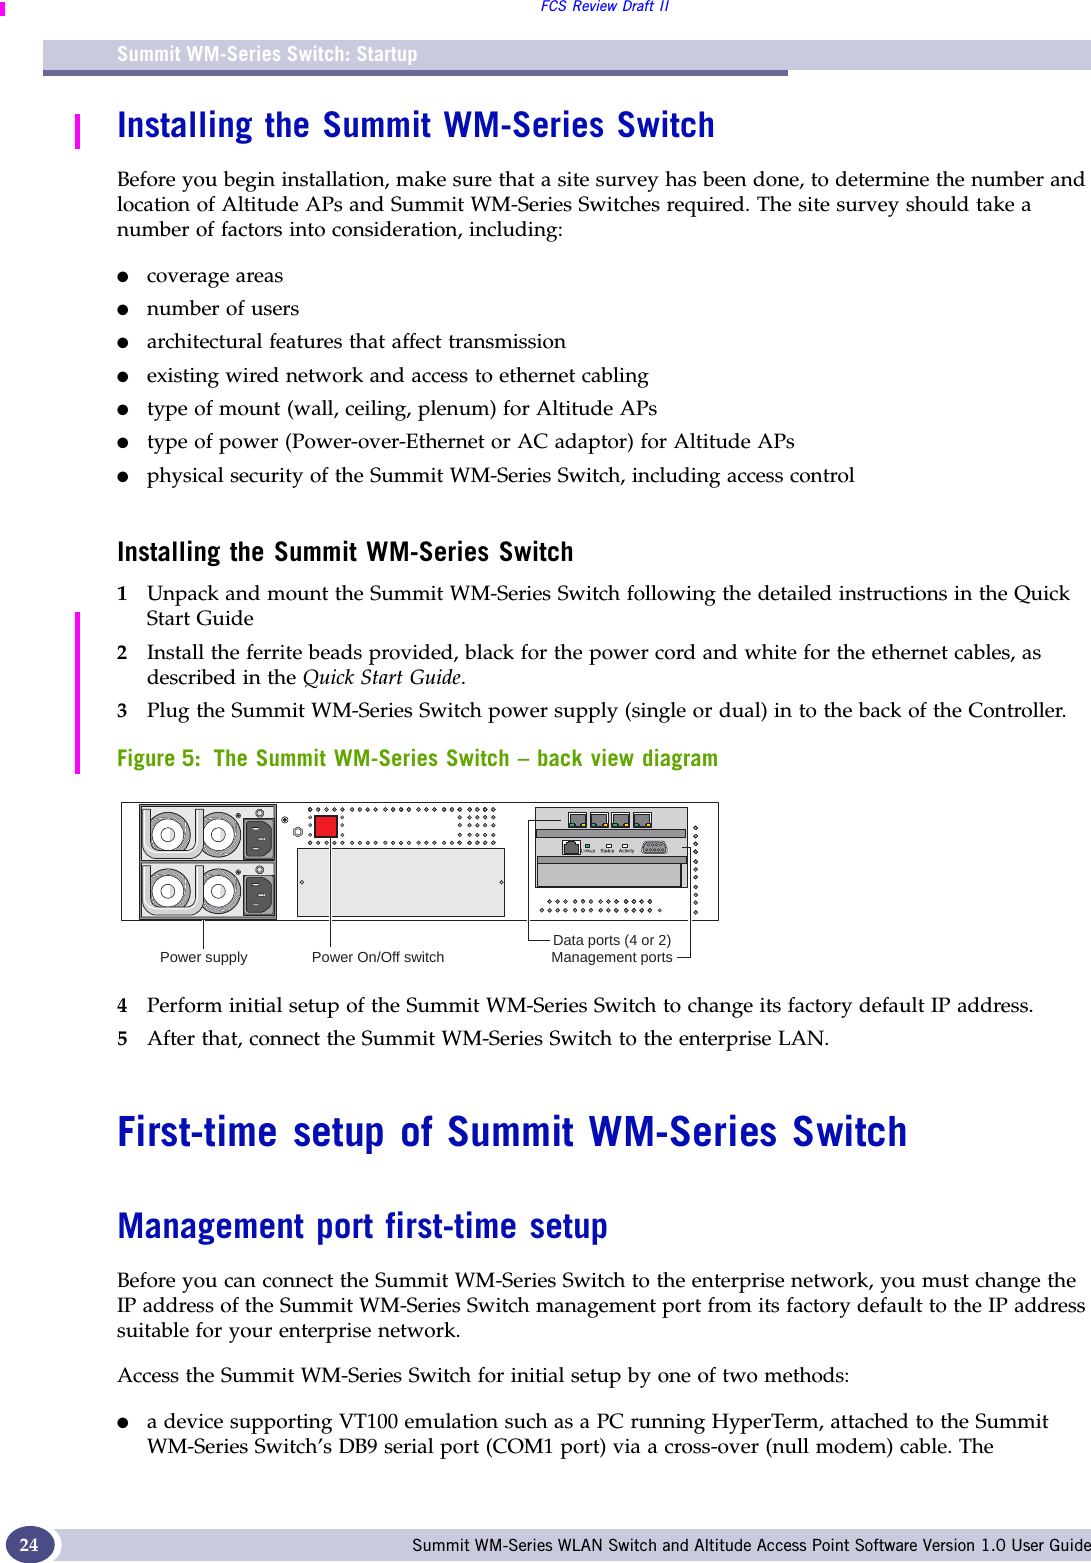 Summit WM-Series Switch: StartupFCS Review Draft IISummit WM-Series WLAN Switch and Altitude Access Point Software Version 1.0 User Guide24Installing the Summit WM-Series SwitchBefore you begin installation, make sure that a site survey has been done, to determine the number and location of Altitude APs and Summit WM-Series Switches required. The site survey should take a number of factors into consideration, including:●coverage areas●number of users●architectural features that affect transmission●existing wired network and access to ethernet cabling●type of mount (wall, ceiling, plenum) for Altitude APs●type of power (Power-over-Ethernet or AC adaptor) for Altitude APs●physical security of the Summit WM-Series Switch, including access controlInstalling the Summit WM-Series Switch1Unpack and mount the Summit WM-Series Switch following the detailed instructions in the Quick Start Guide2Install the ferrite beads provided, black for the power cord and white for the ethernet cables, as described in the Quick Start Guide. 3Plug the Summit WM-Series Switch power supply (single or dual) in to the back of the Controller. Figure 5: The Summit WM-Series Switch – back view diagram4Perform initial setup of the Summit WM-Series Switch to change its factory default IP address.5After that, connect the Summit WM-Series Switch to the enterprise LAN. First-time setup of Summit WM-Series SwitchManagement port first-time setupBefore you can connect the Summit WM-Series Switch to the enterprise network, you must change the IP address of the Summit WM-Series Switch management port from its factory default to the IP address suitable for your enterprise network.Access the Summit WM-Series Switch for initial setup by one of two methods:●a device supporting VT100 emulation such as a PC running HyperTerm, attached to the Summit WM-Series Switch’s DB9 serial port (COM1 port) via a cross-over (null modem) cable. The Power supply Power On/Off switchData ports (4 or 2)Management ports